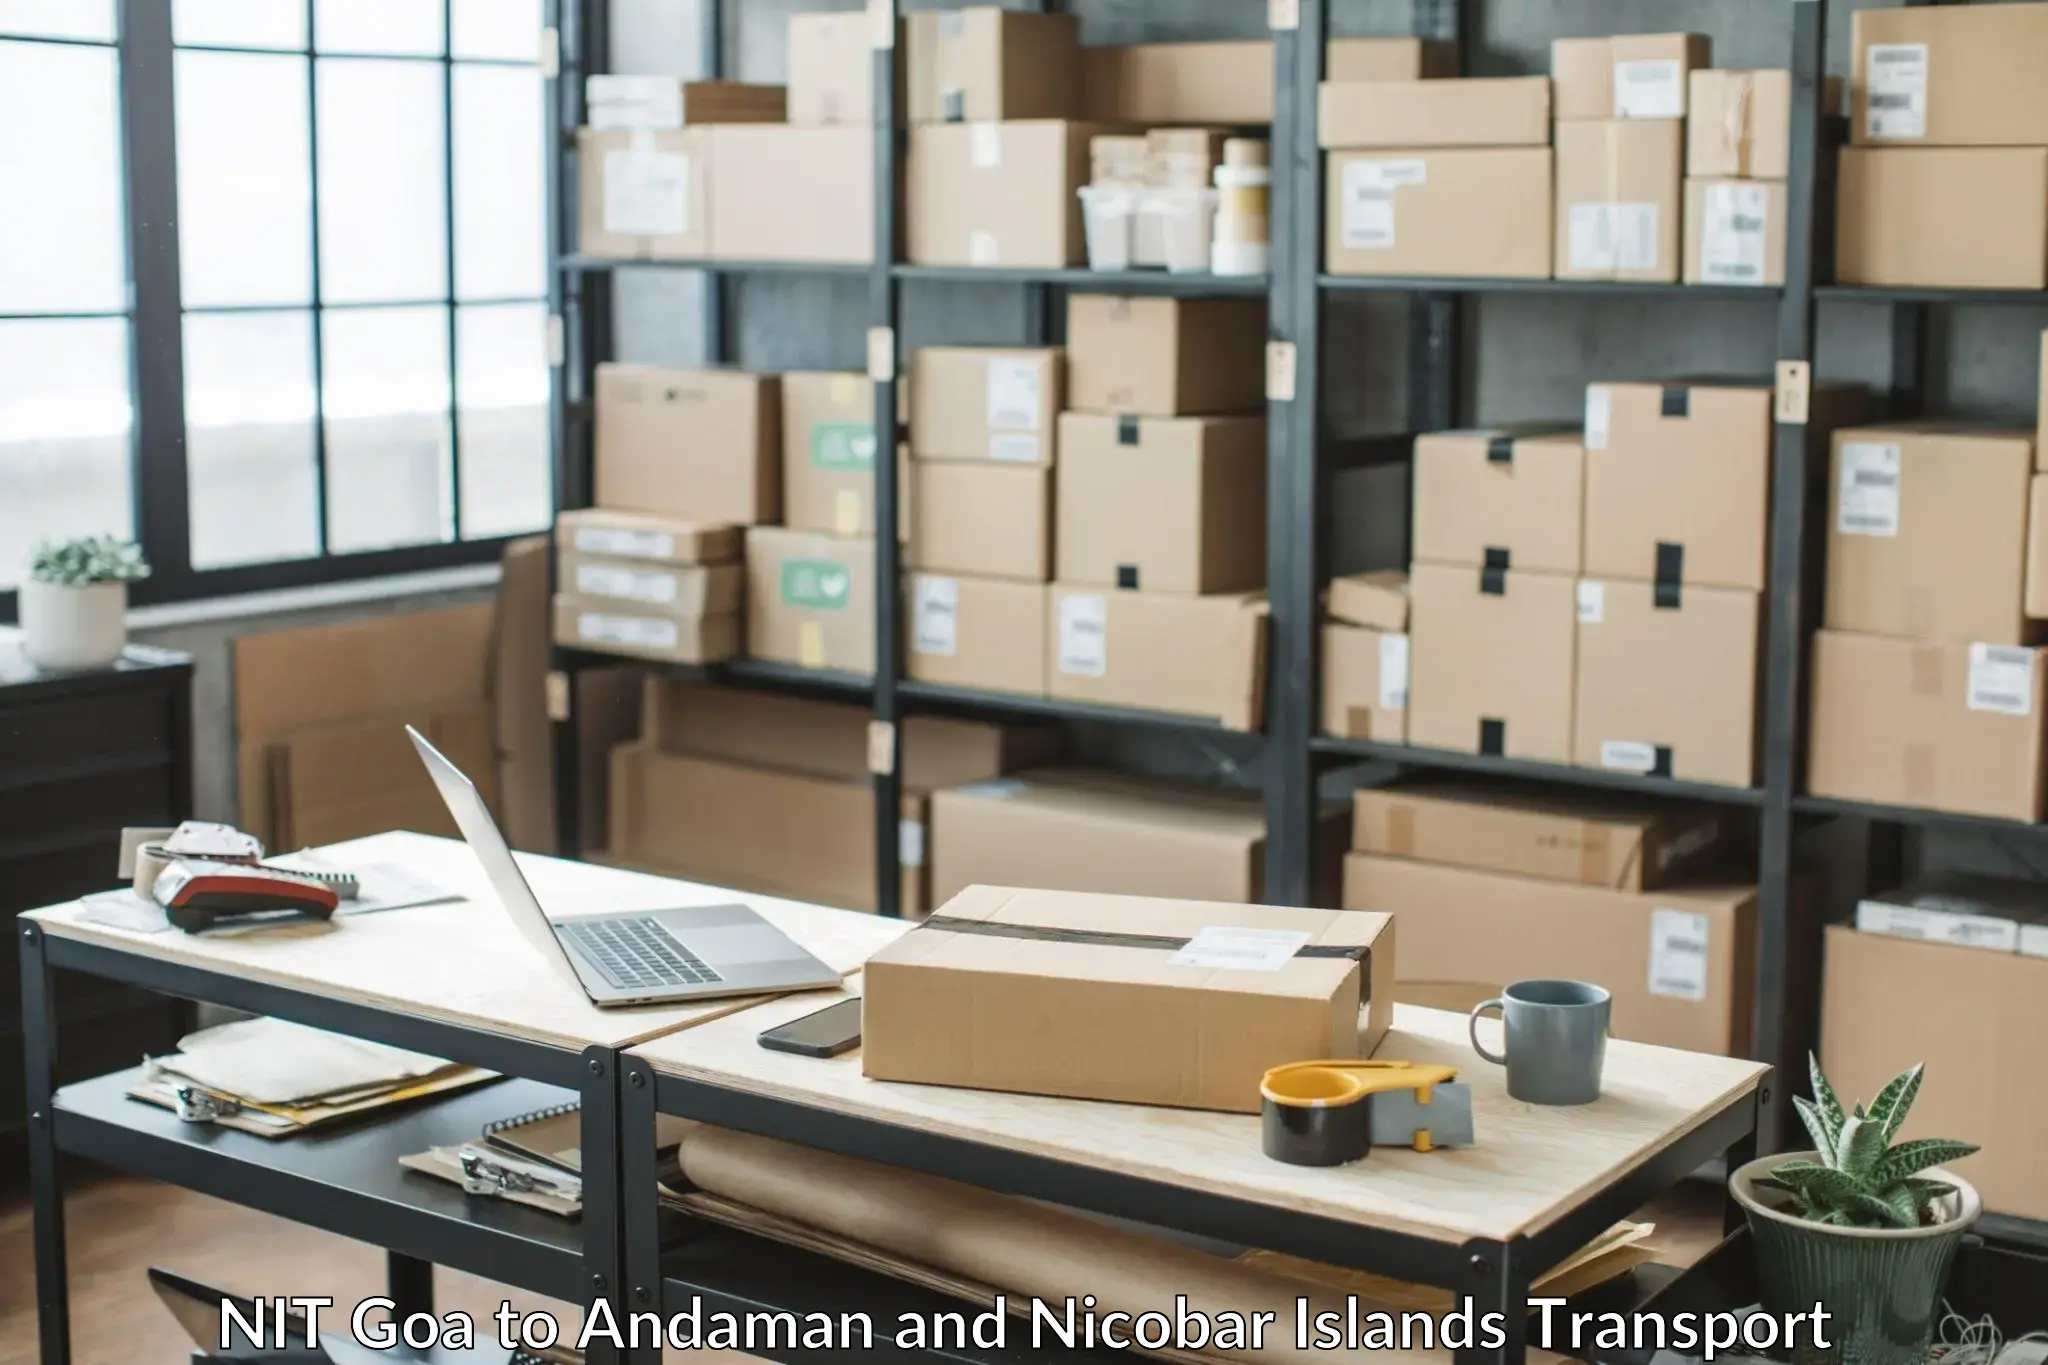 Logistics transportation services in NIT Goa to Andaman and Nicobar Islands